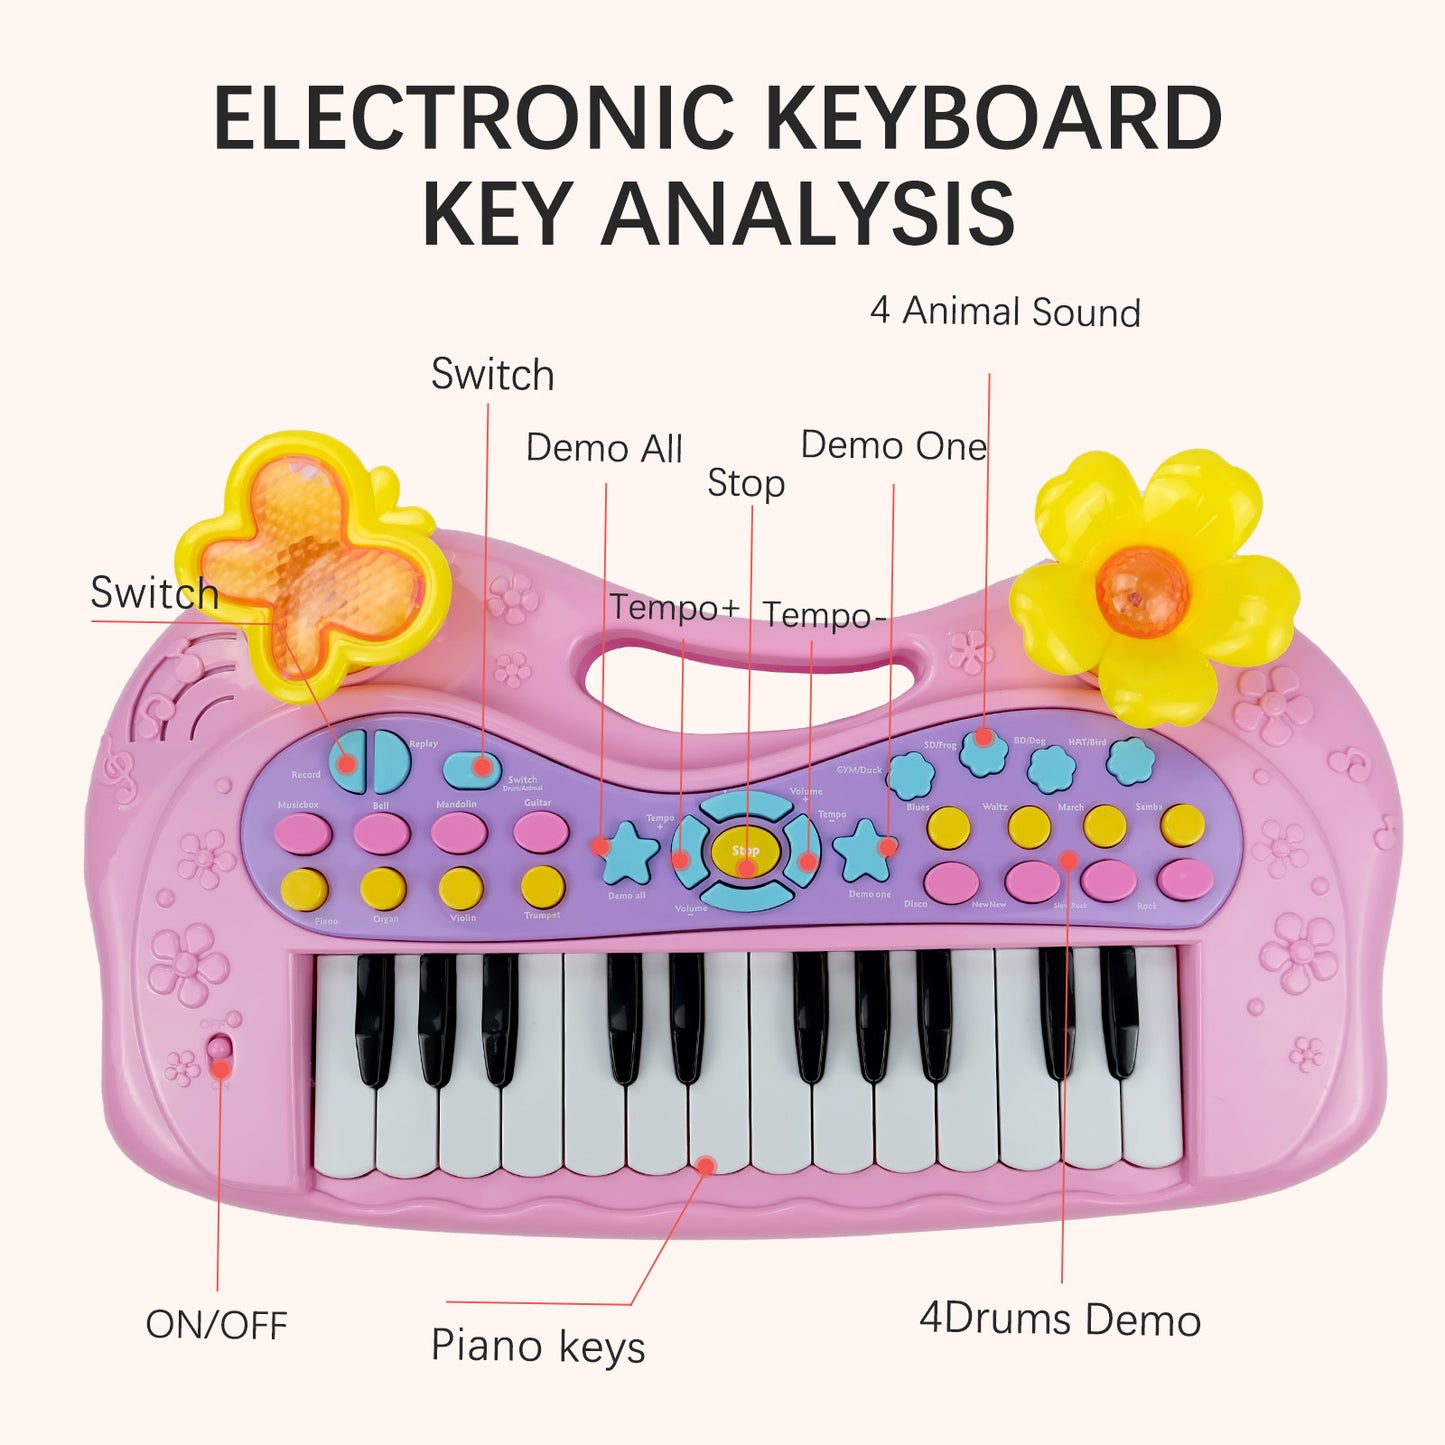 AOQIMITENJOY Musical Instrument Electronic 31 Keys Keyboard Toys LED Lighting Children's Toys Birthday Gifts for Boys and Girls 3 Year Old+ HK-6013A